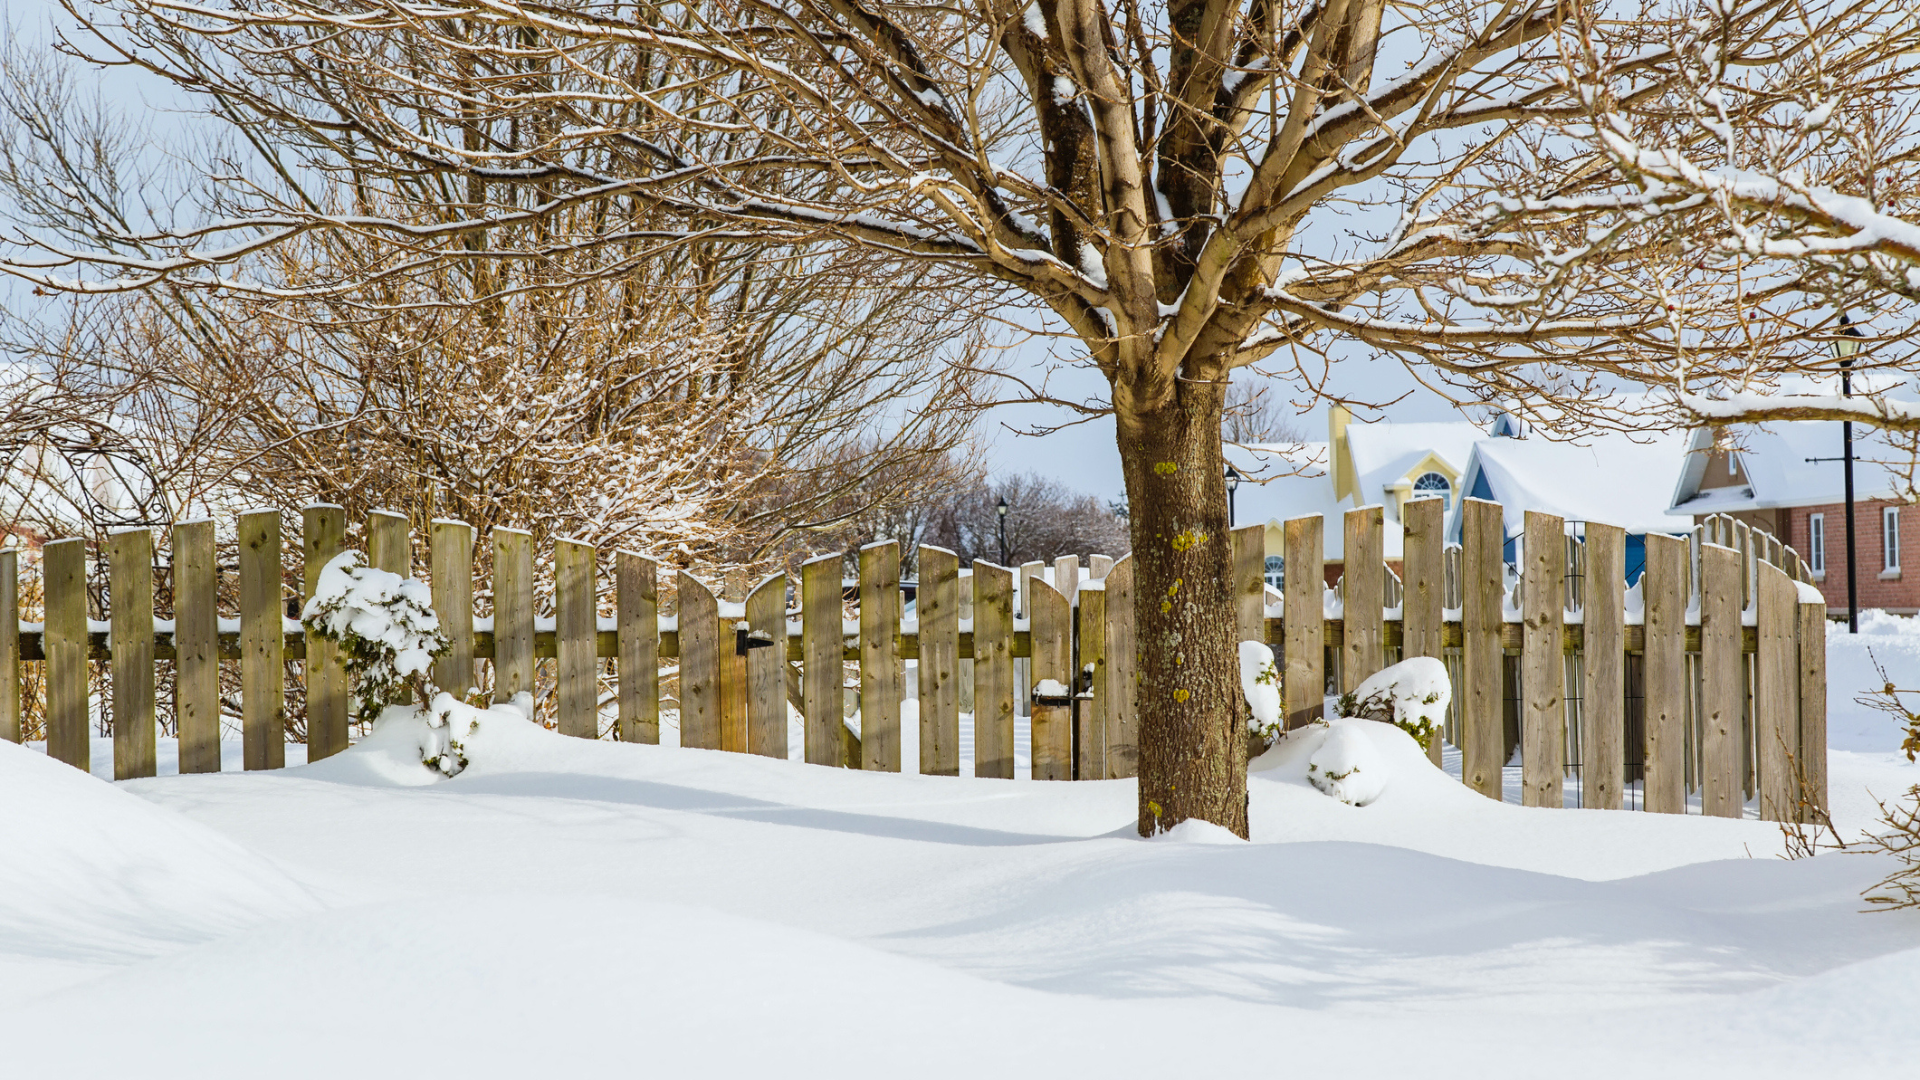 expert reveals the 7 garden items you should never keep outside over winter